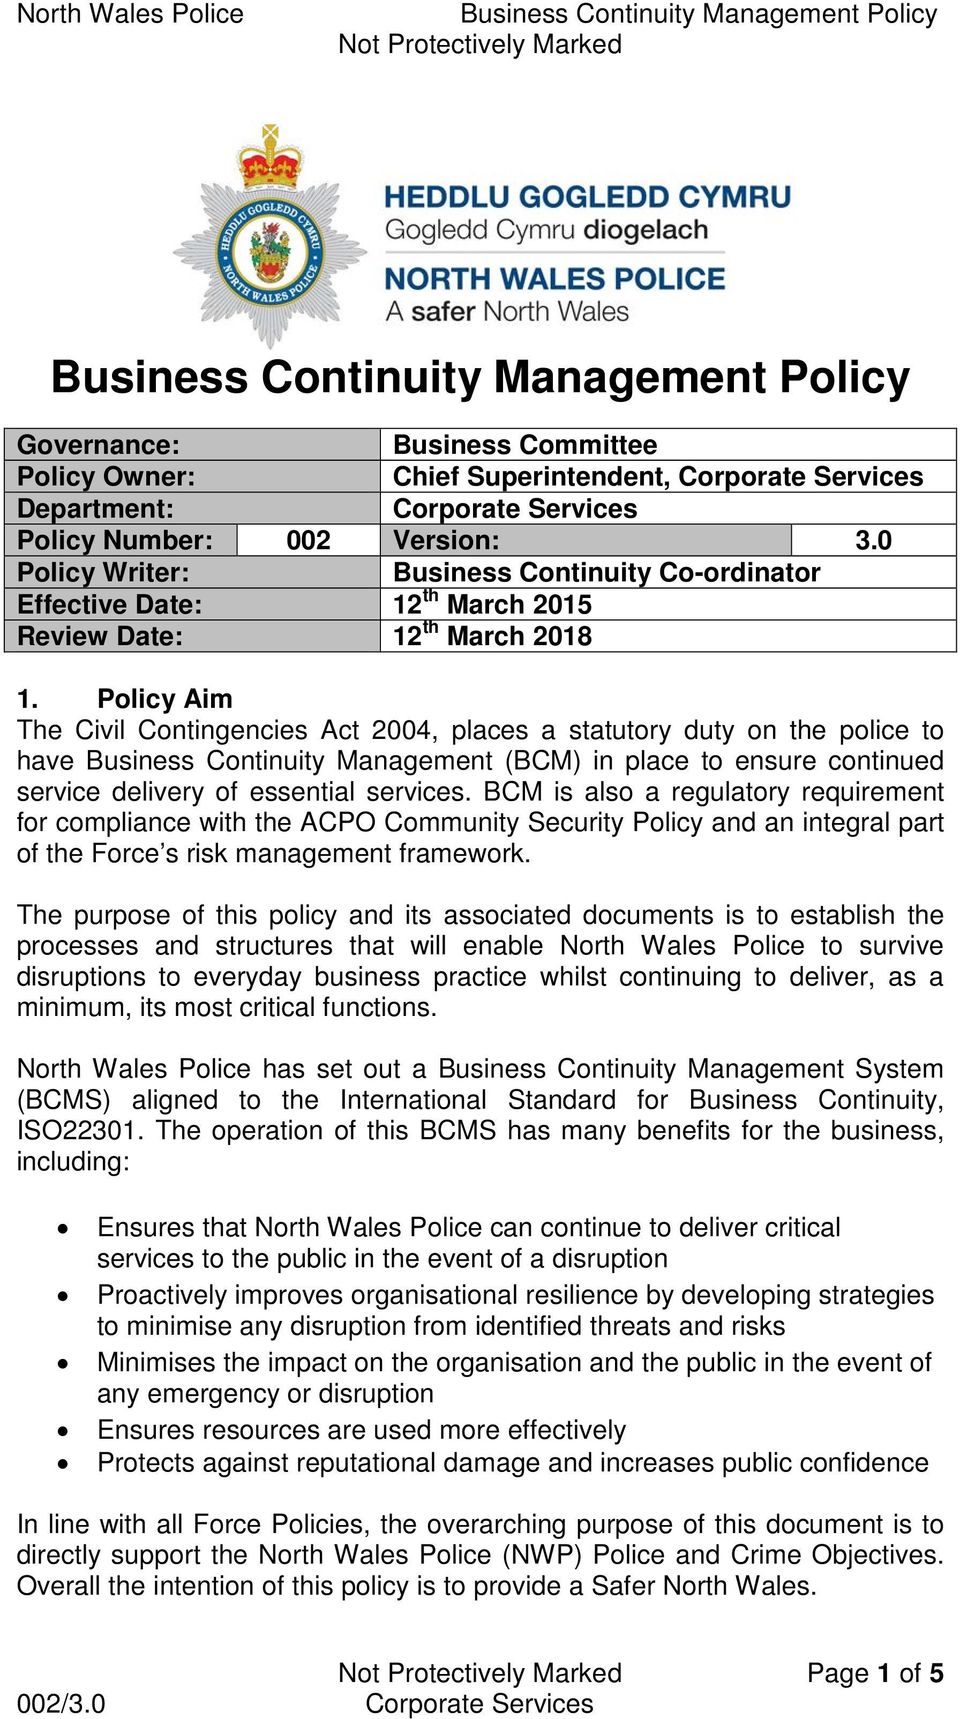 Policy Aim The Civil Contingencies Act 2004, places a statutory duty on the police to have Business Continuity Management (BCM) in place to ensure continued service delivery of essential services.